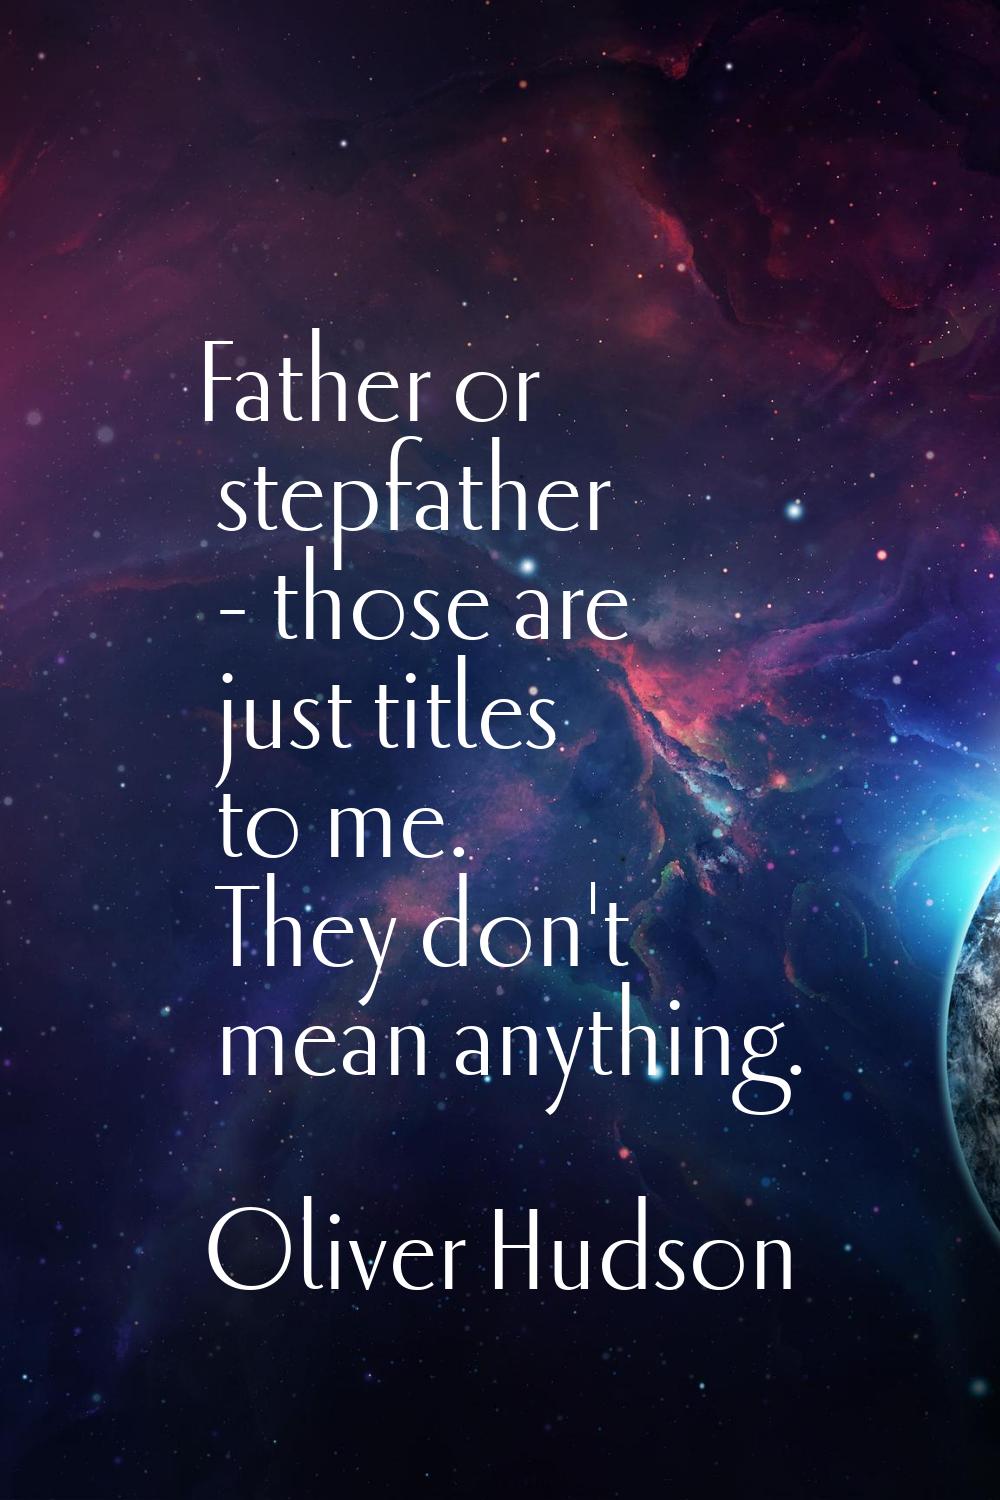 Father or stepfather - those are just titles to me. They don't mean anything.